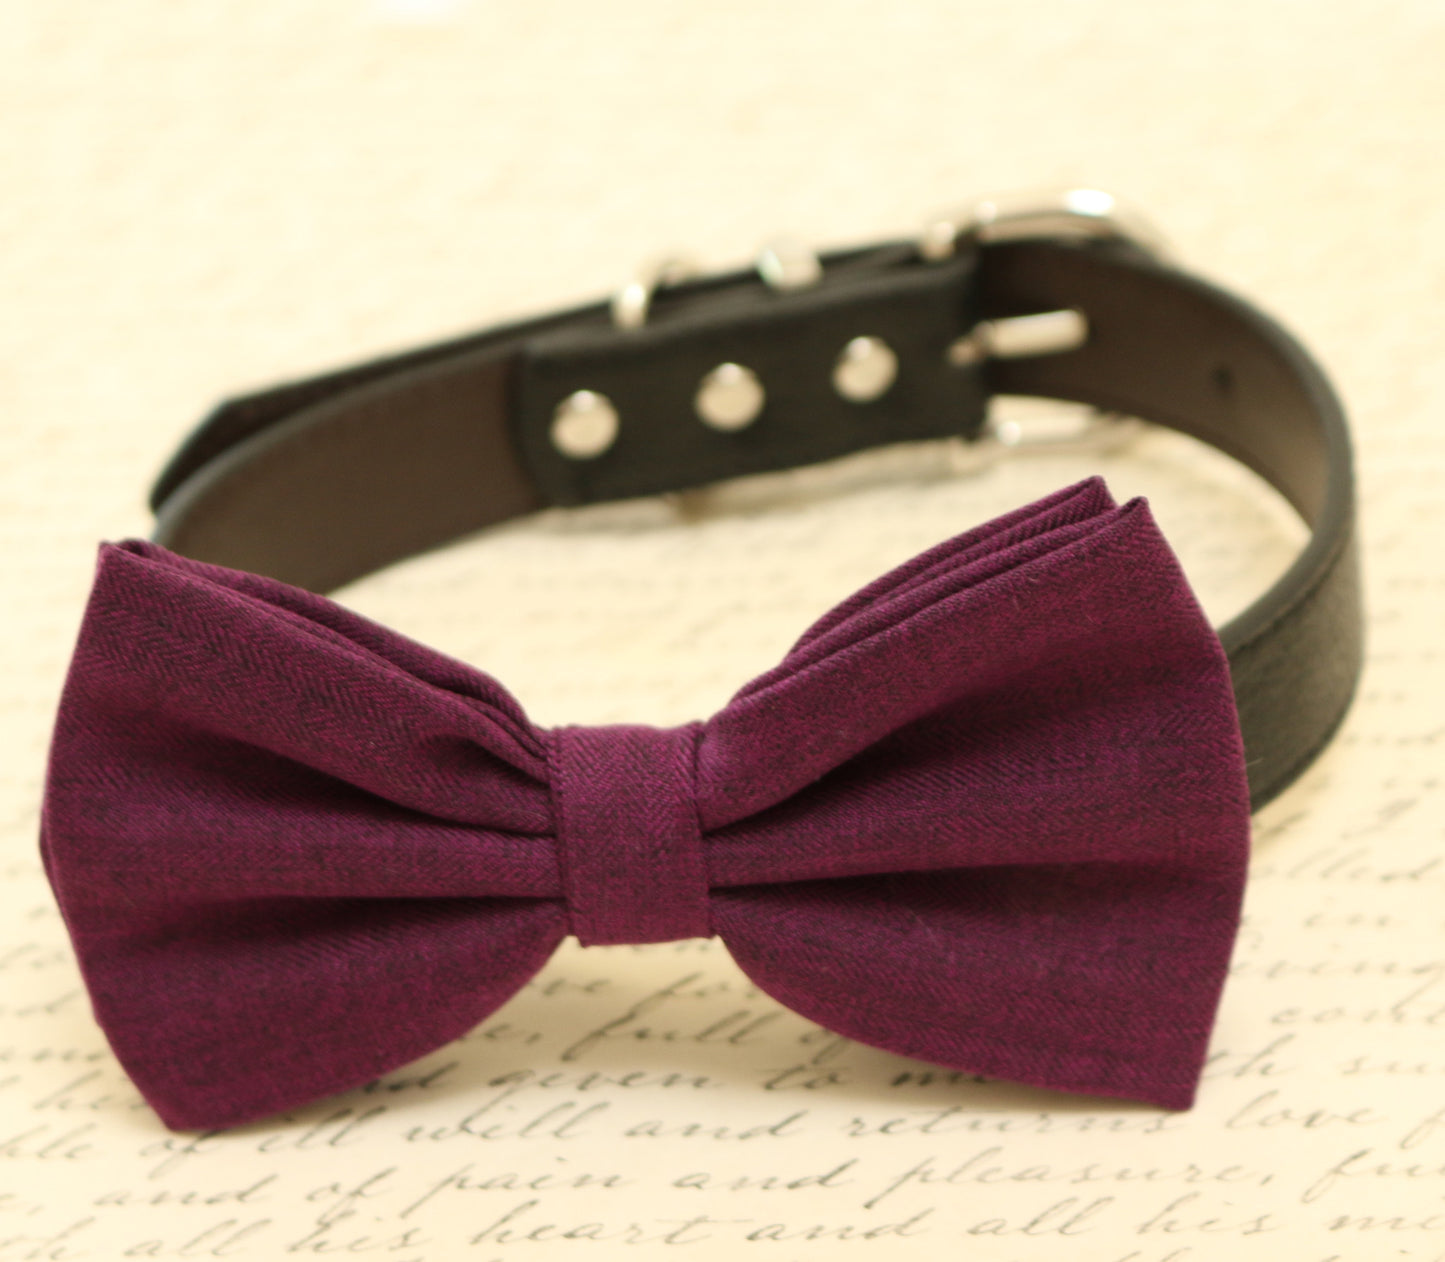 Eggplant dog bow tie attached to collar, Eggplant wedding, dog birthday gift , Wedding dog collar